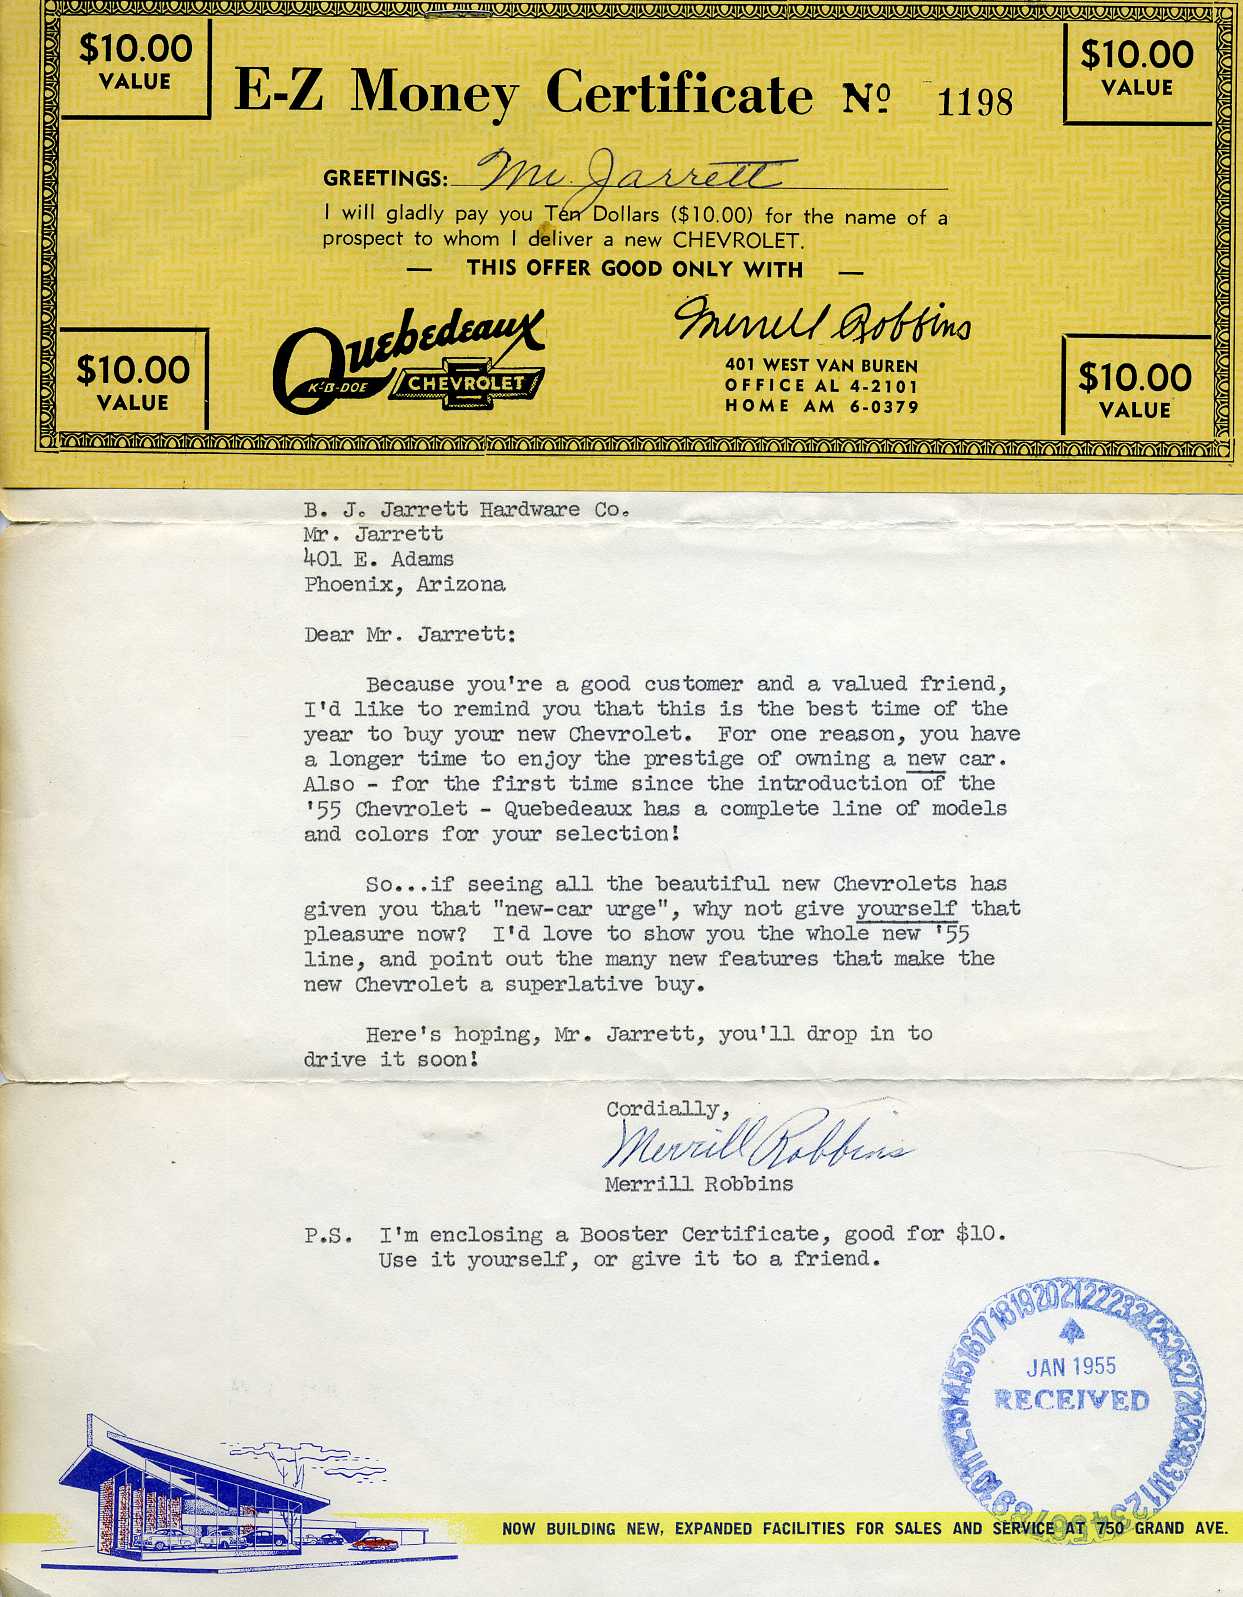 Booster Certificate for Quebedeaux Chevrolet in Phoenix Arizona by Victor Gruen with Ralph Haver